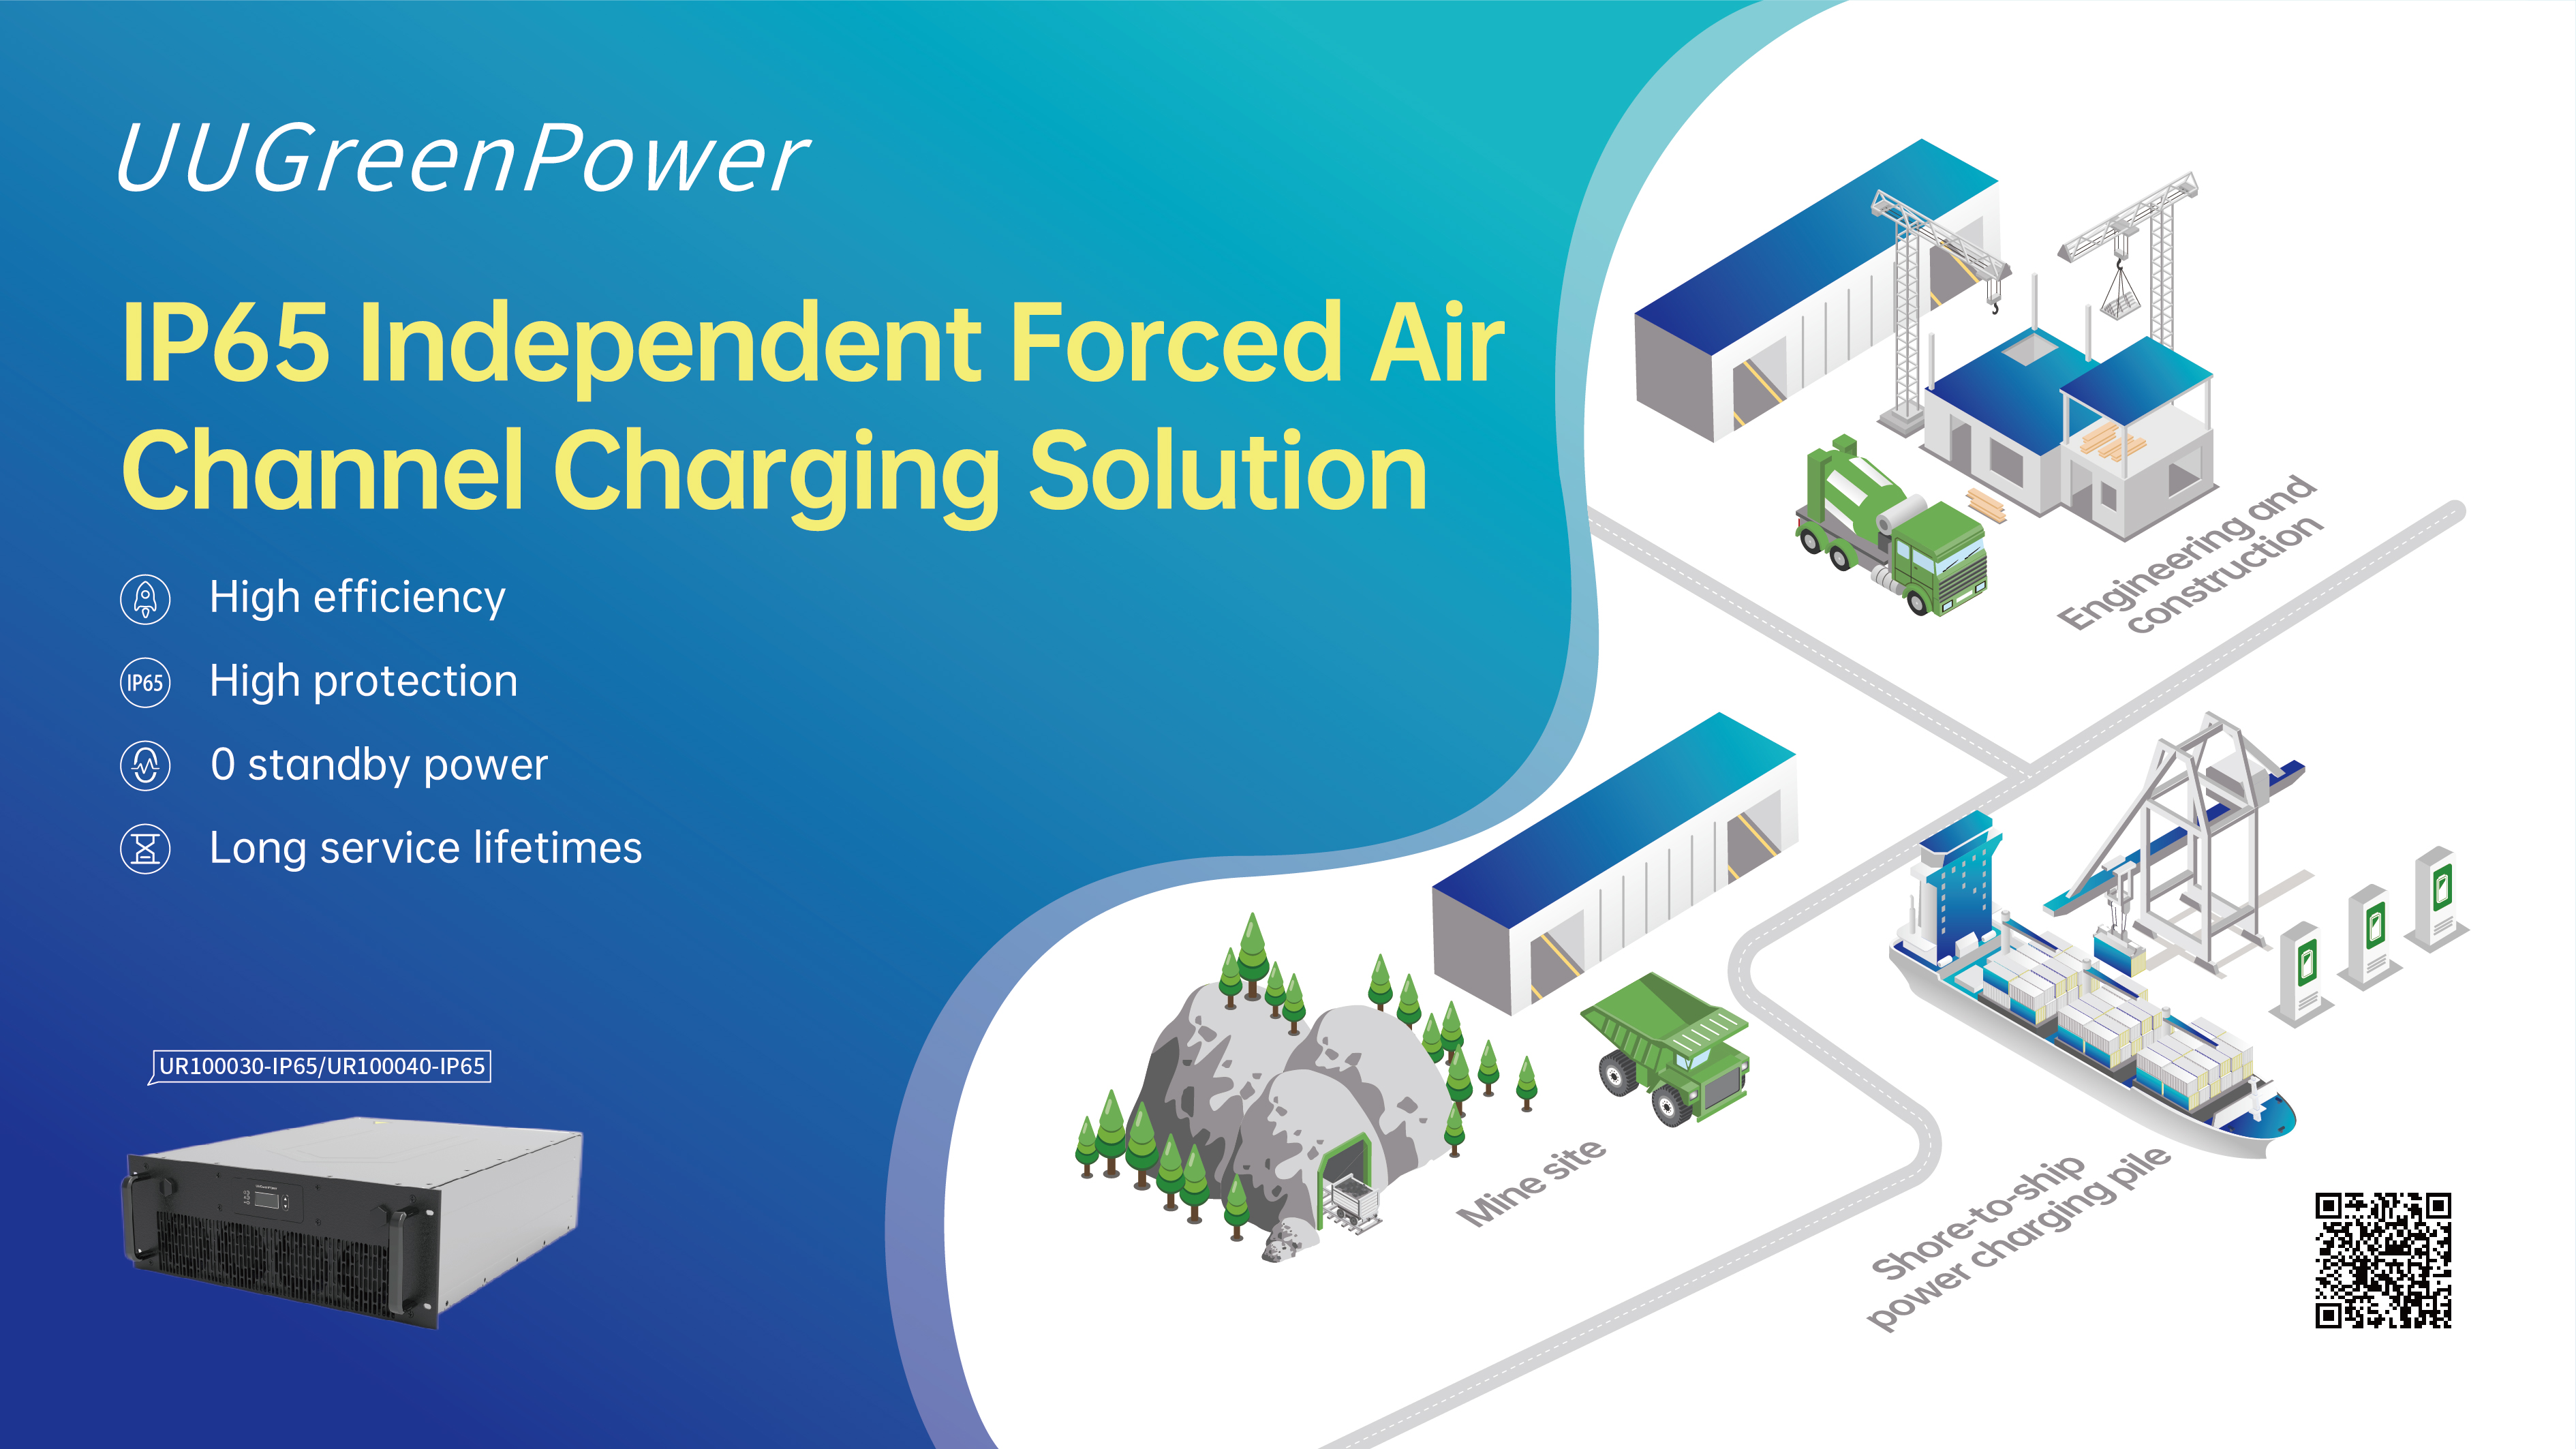 UUGreenPower IP65 Independent Forced Air Channel Charging Solution.jpg